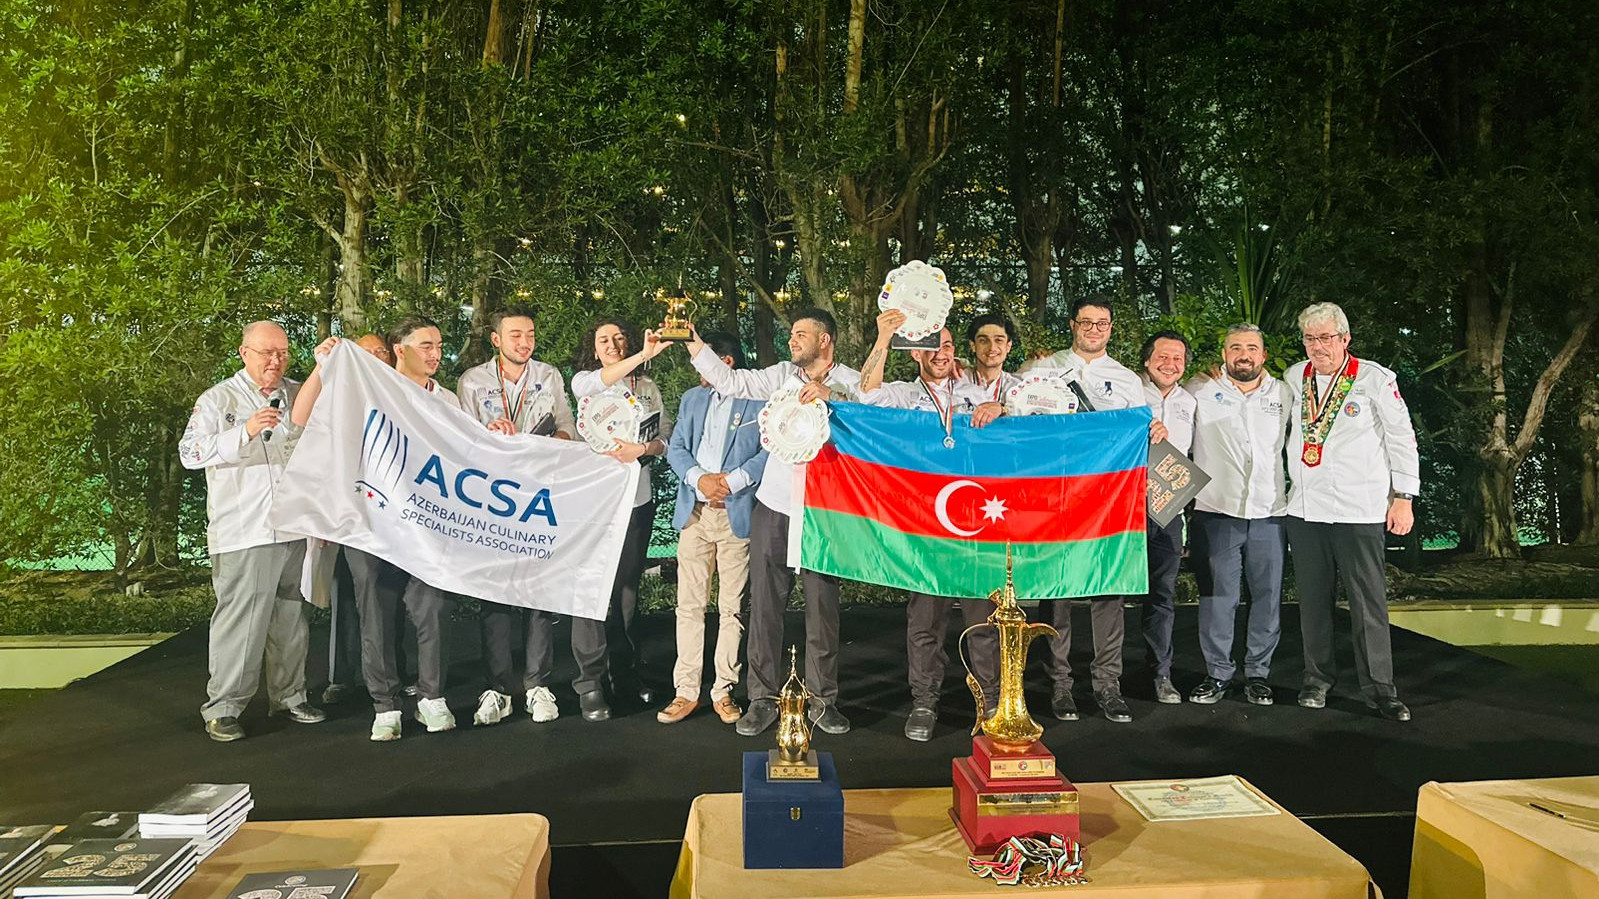 >The National Culinary Team won silver and bronze medals at the international competition held in the UAE